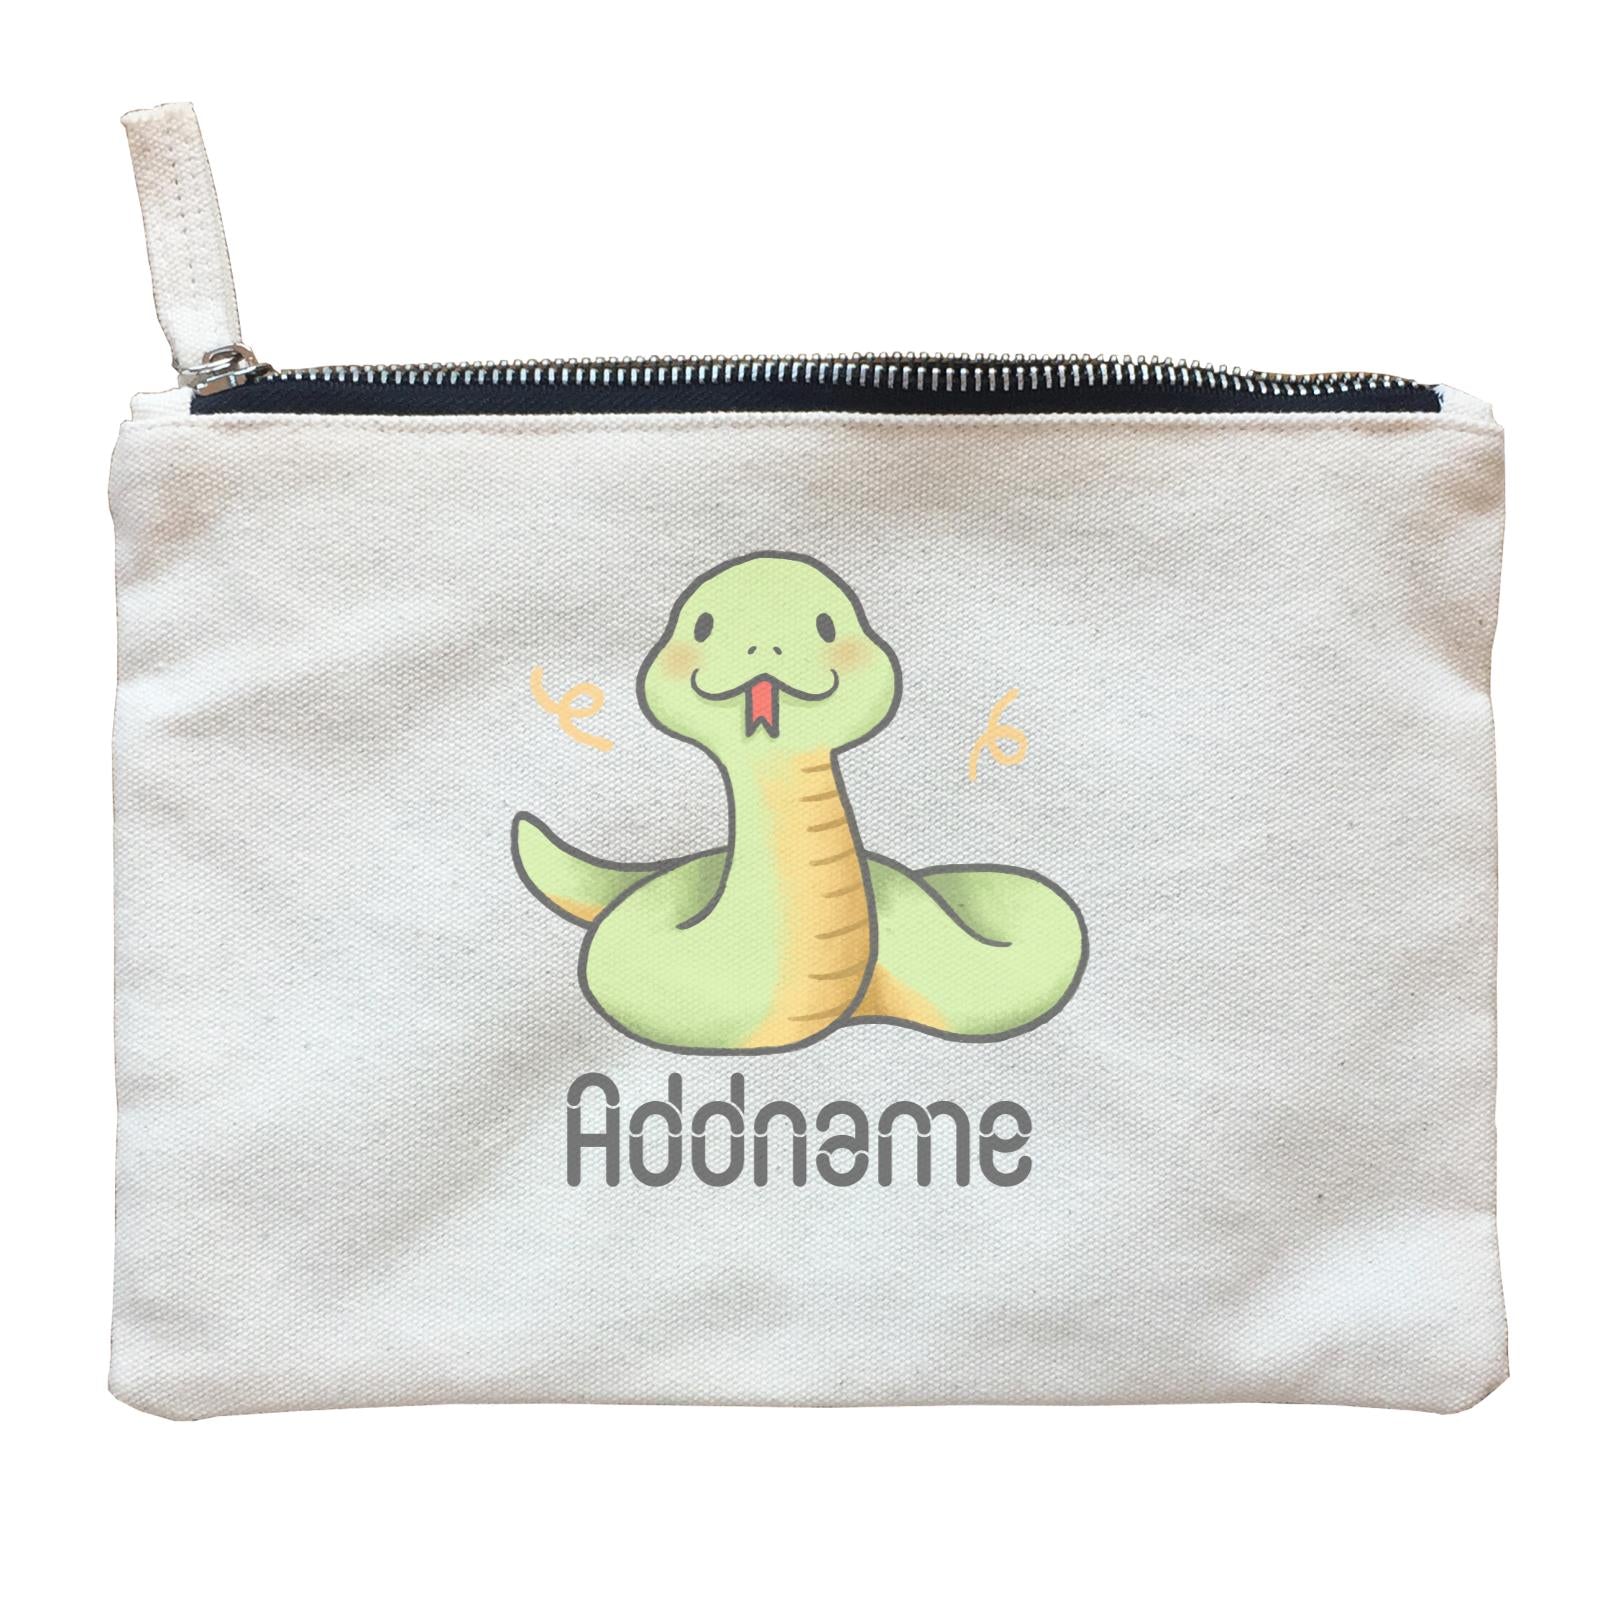 Cute Hand Drawn Style Snake Addname Zipper Pouch